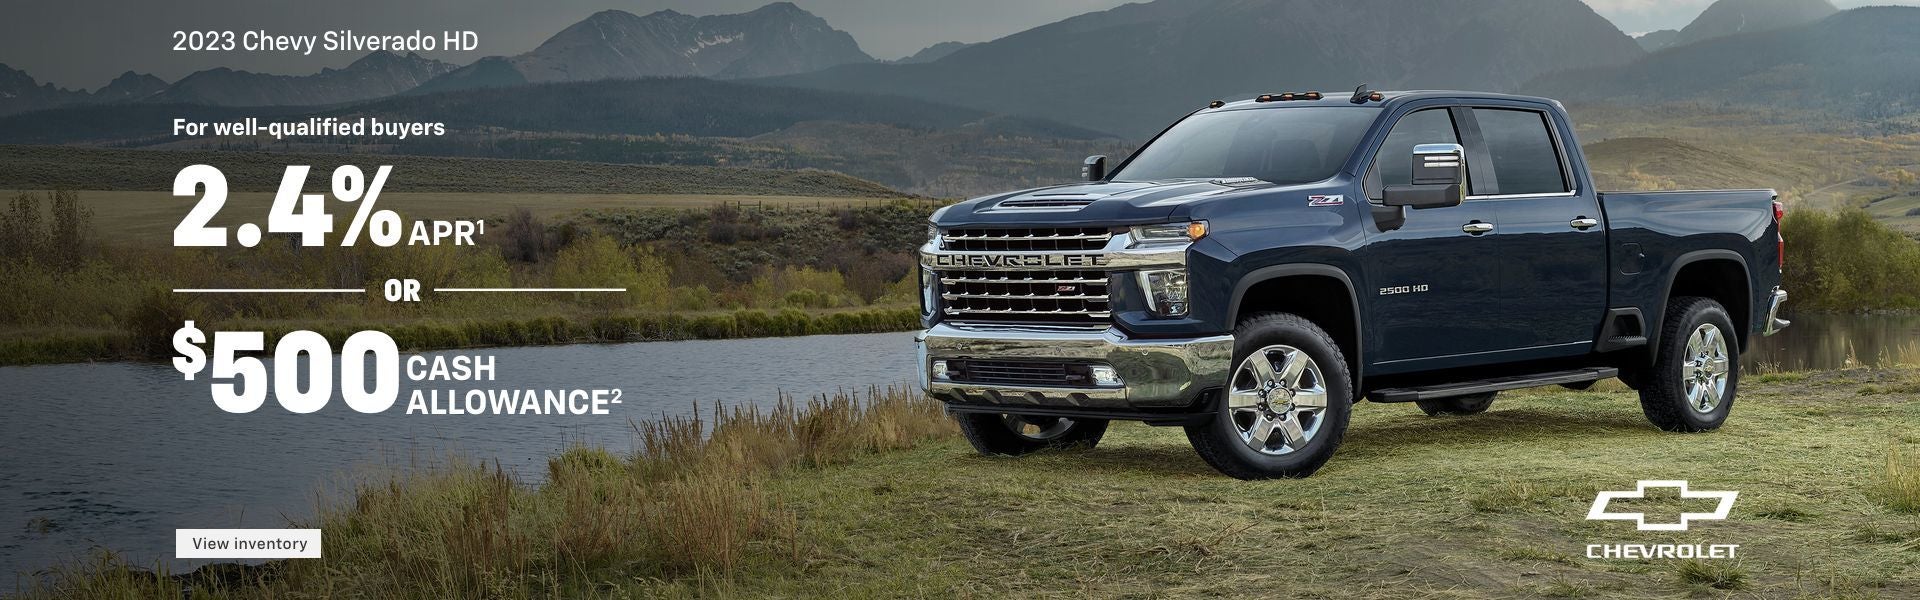 2023 Chevy Silverado HD. It all starts with a Chevrolet. For well-qualified buyers 2.4% APR. Or, ...